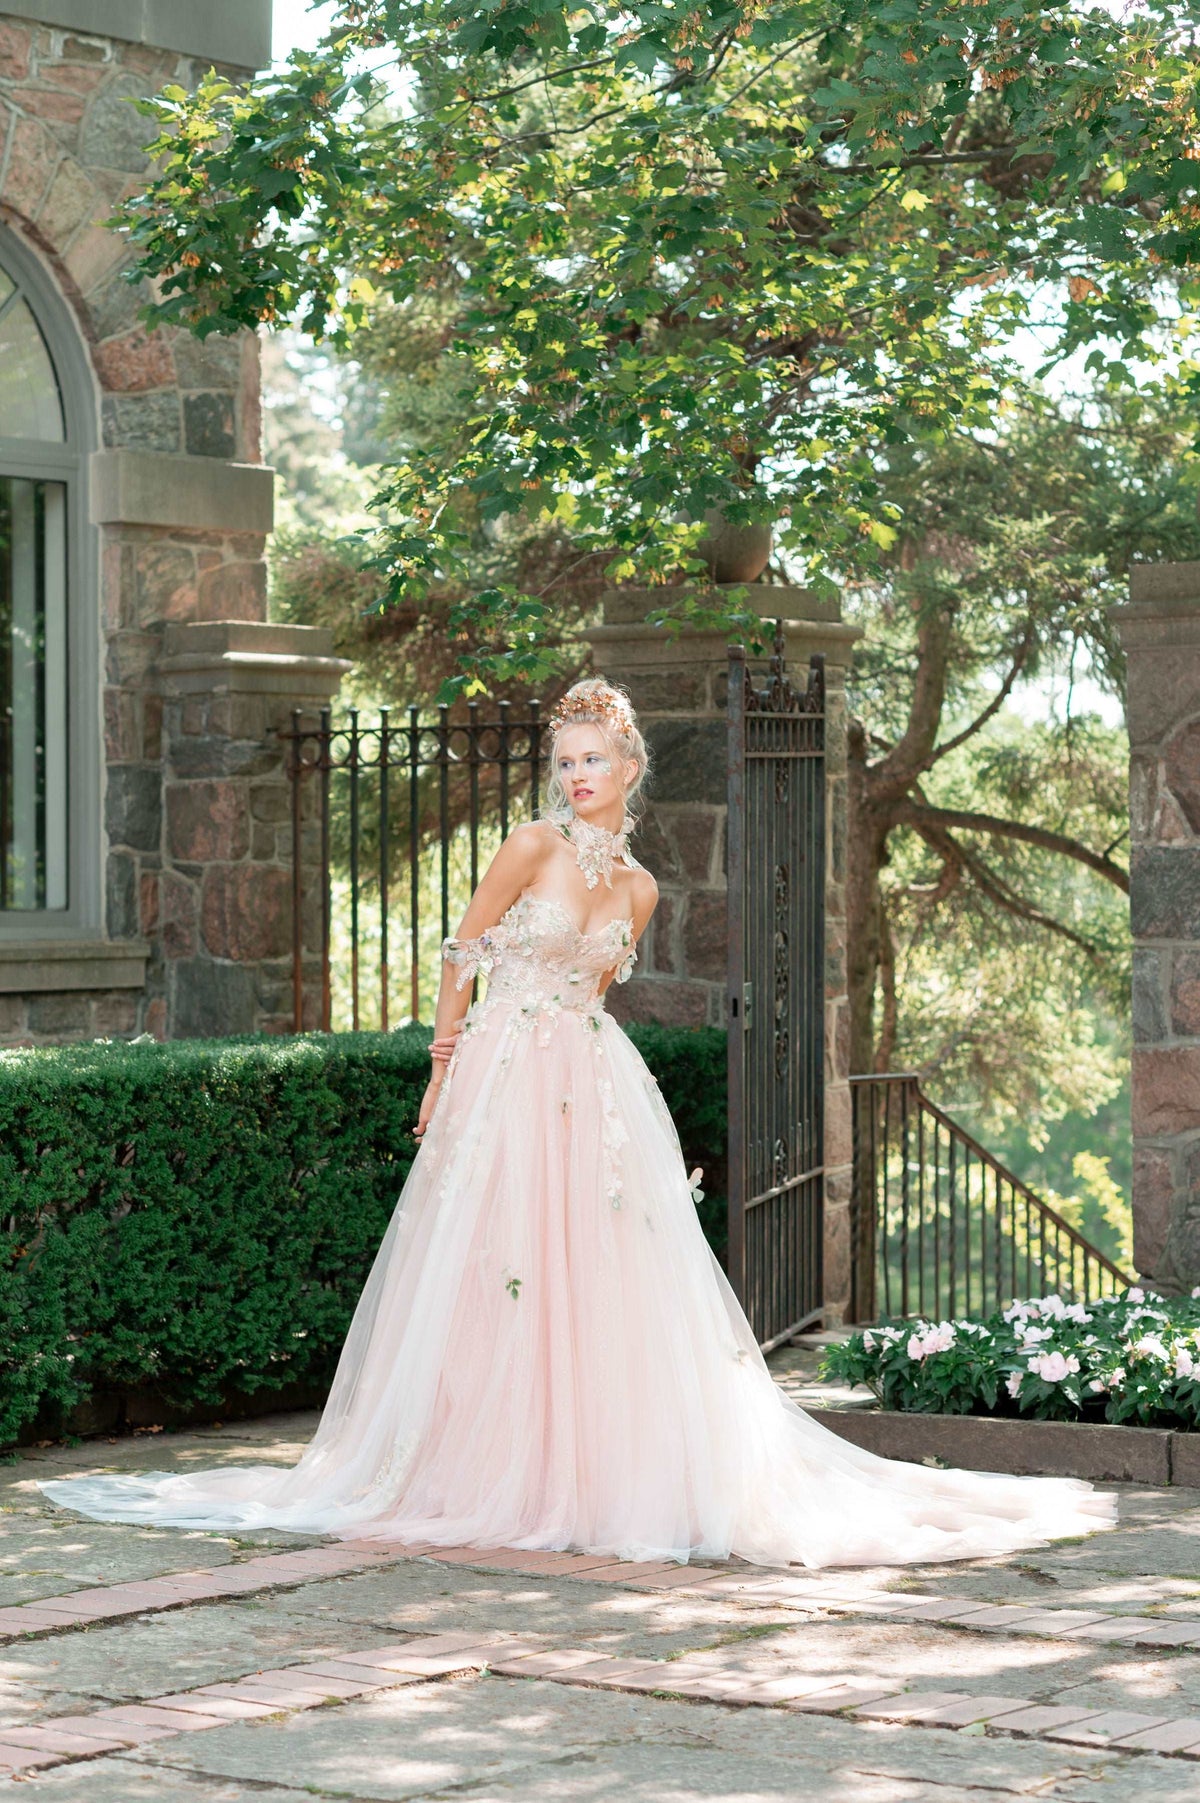 The most romantic and whimsical couture fairytale wedding dress. Whimsical fairy core inspired pink tulle wedding dress for unconventionally cool brides. Catherine Langlois, Toronto, Canada